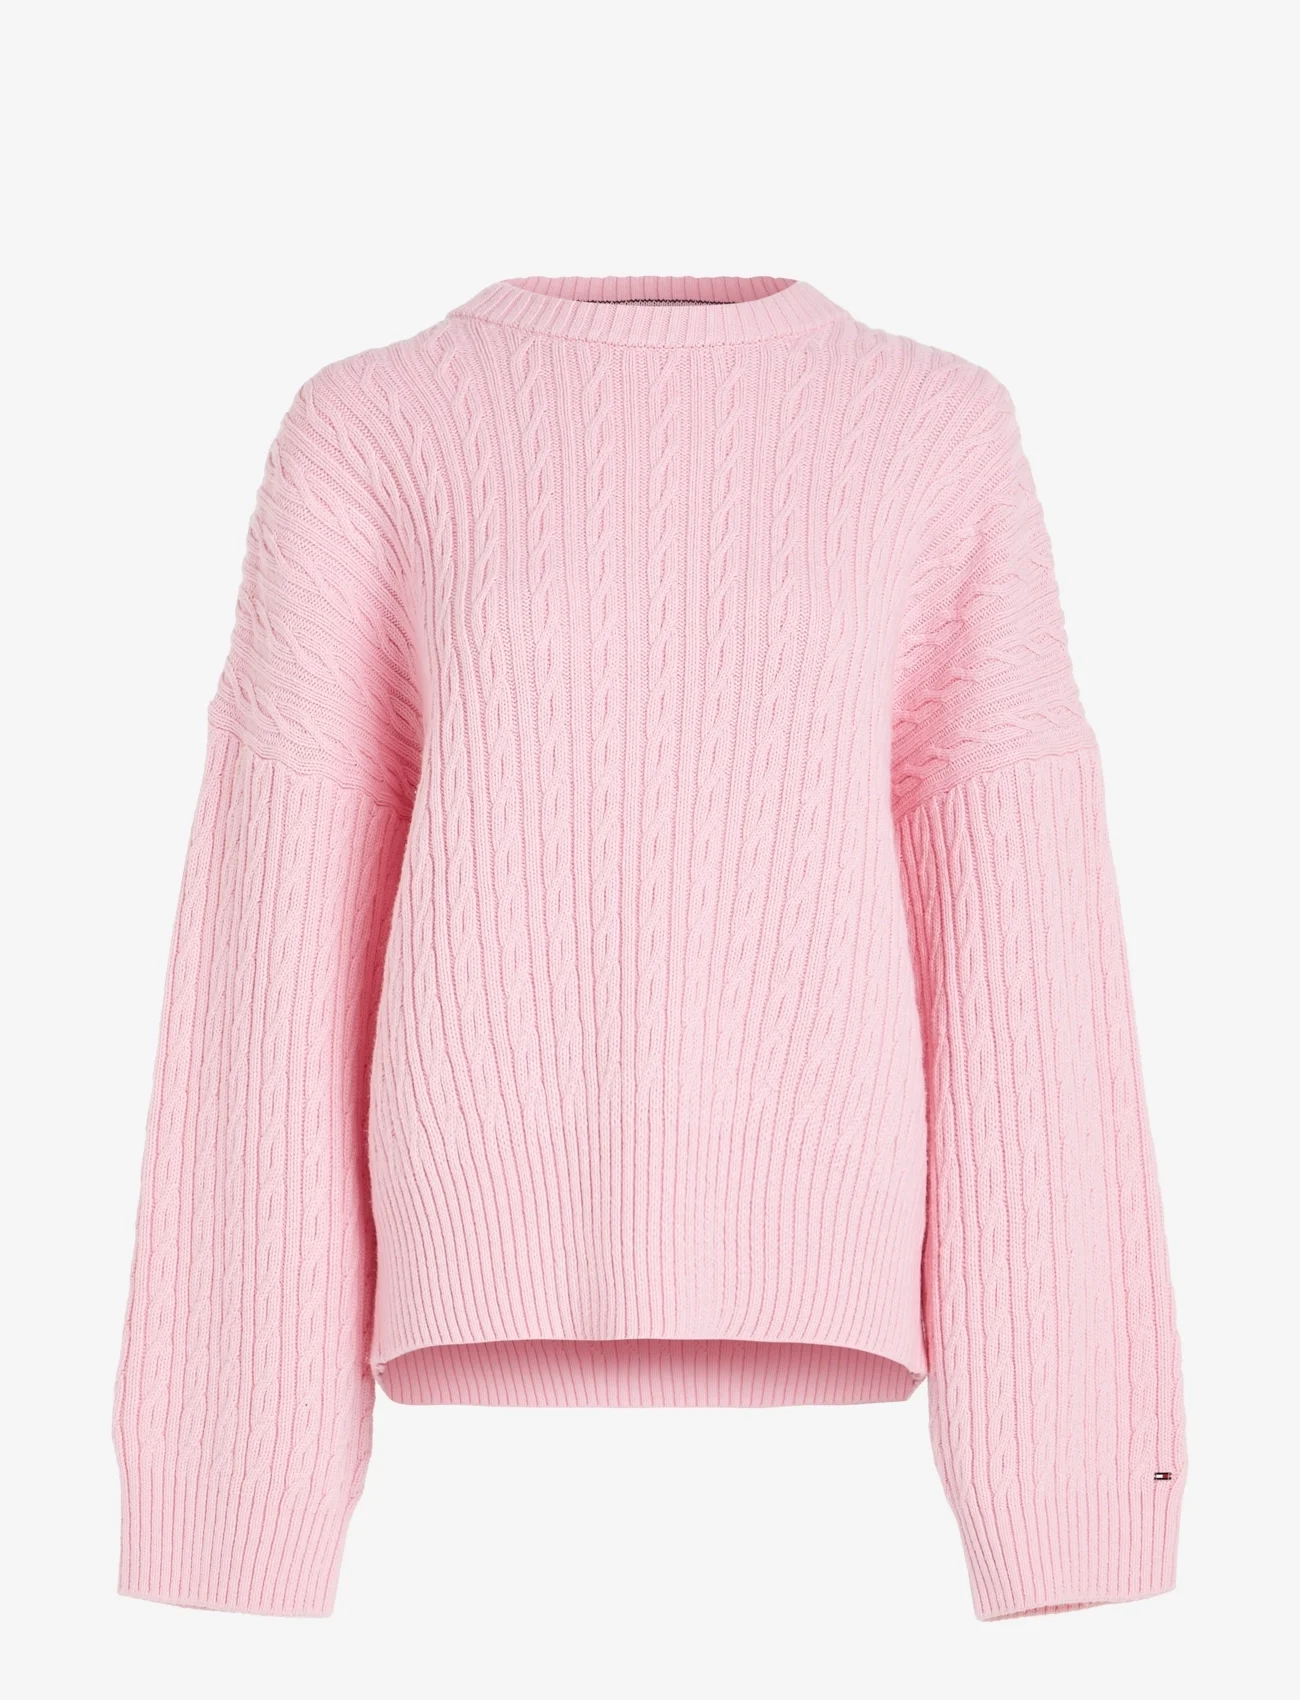 Tommy Hilfiger - CABLE ALL OVER C-NK SWEATER - neulepuserot - iconic pink - 0